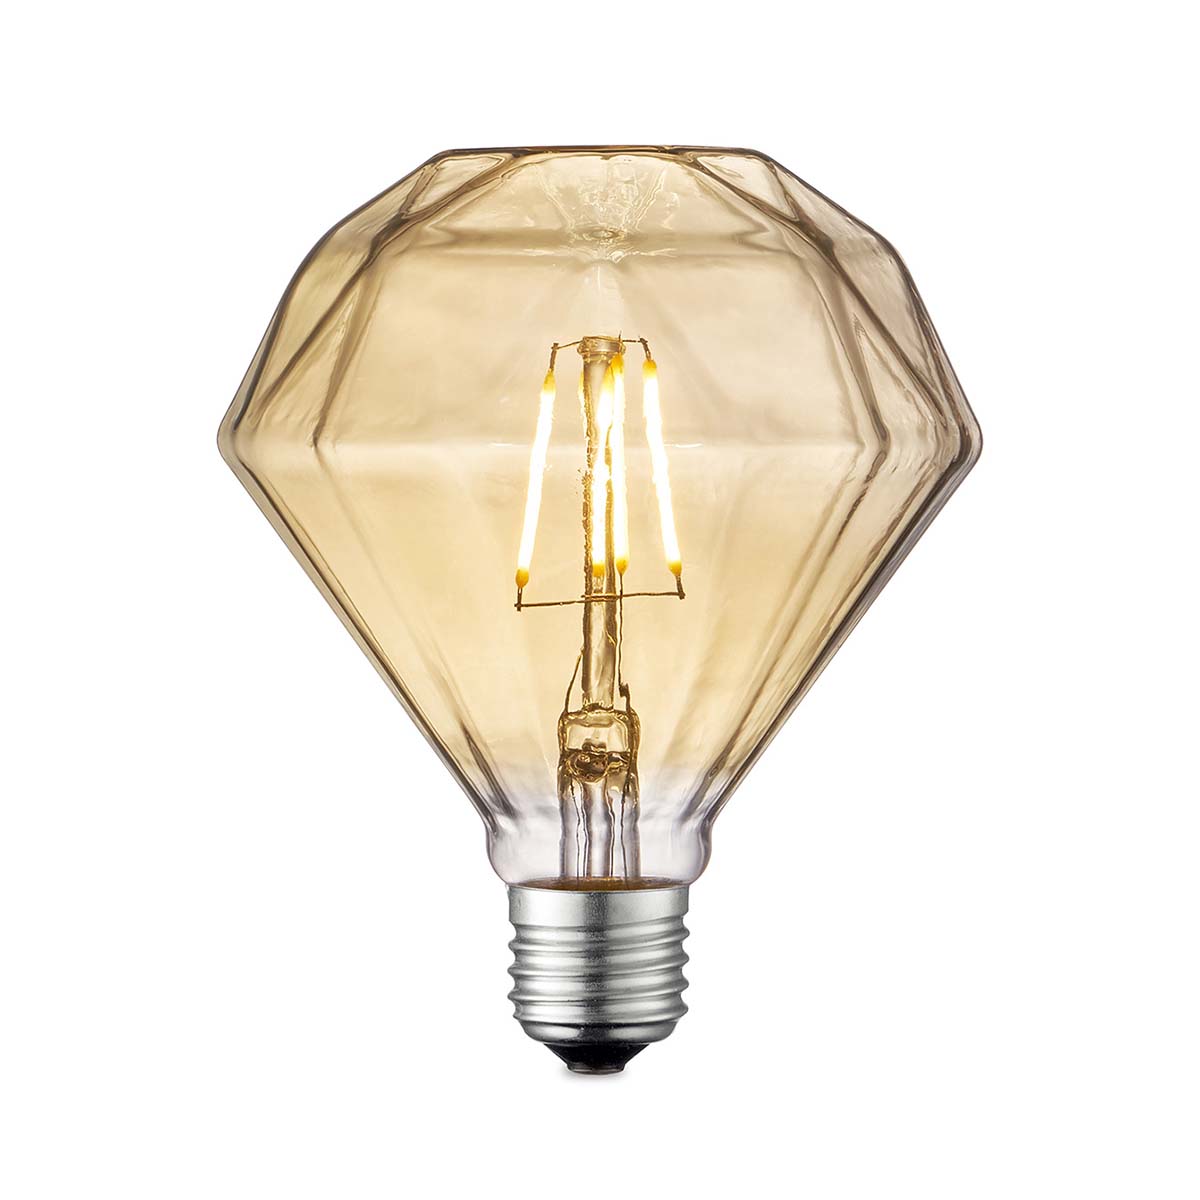 Tangla lighting - TLB-8017-06AM - LED Light Bulb Deco filament - special D112 4W amber - dimmable - E27